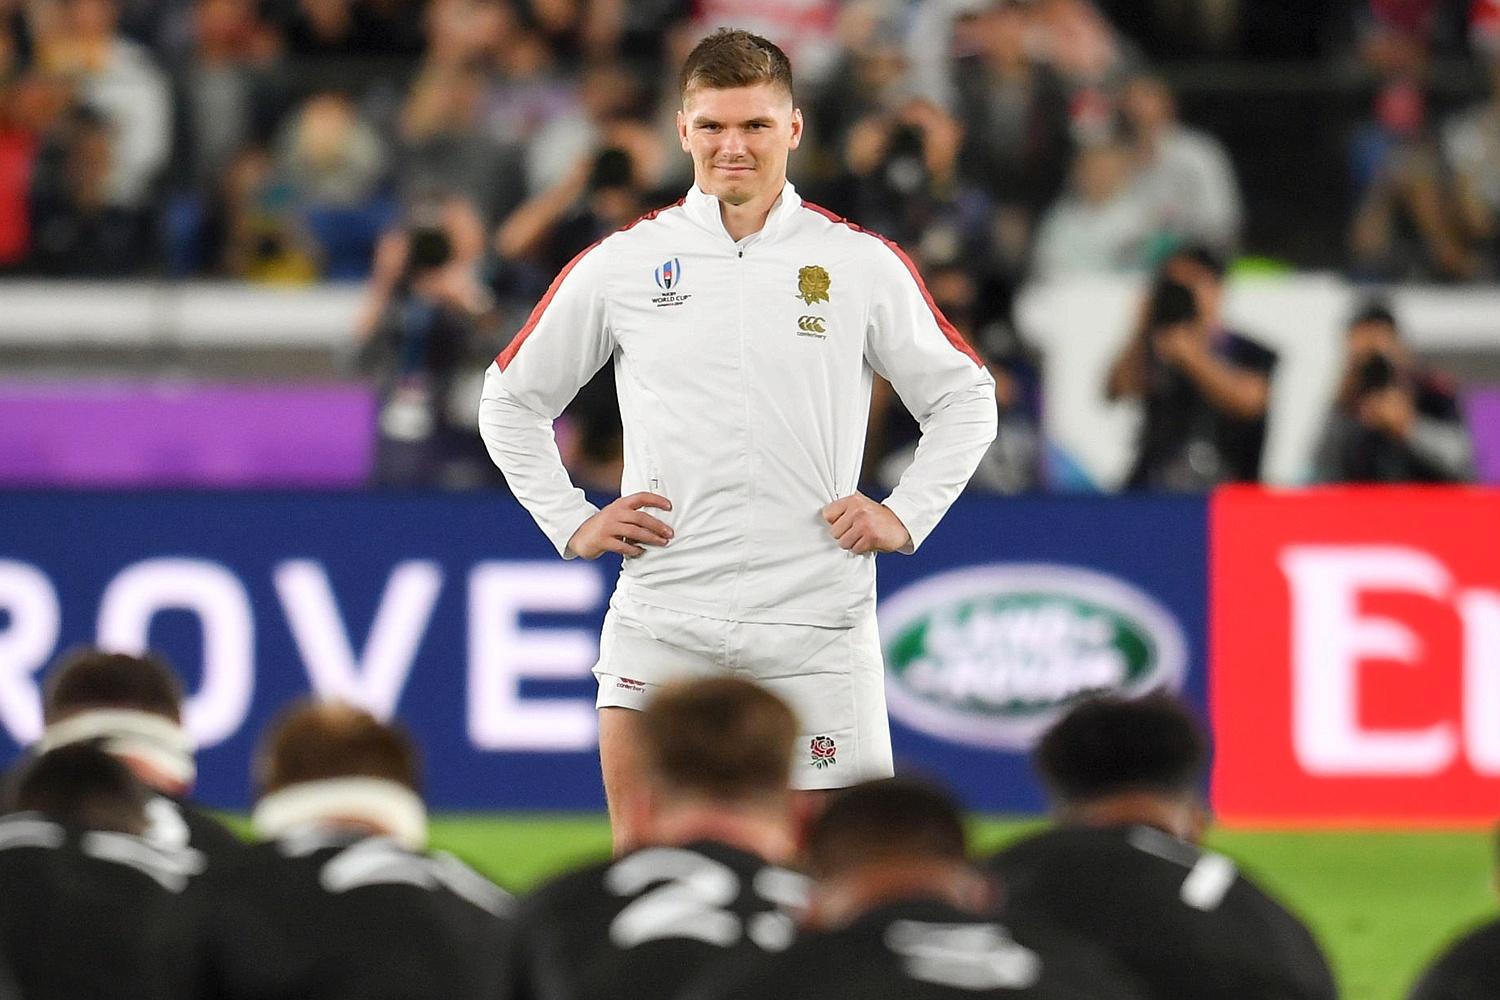 Owen Farrell on England, the Six Nations, father Andy and the art of leadership